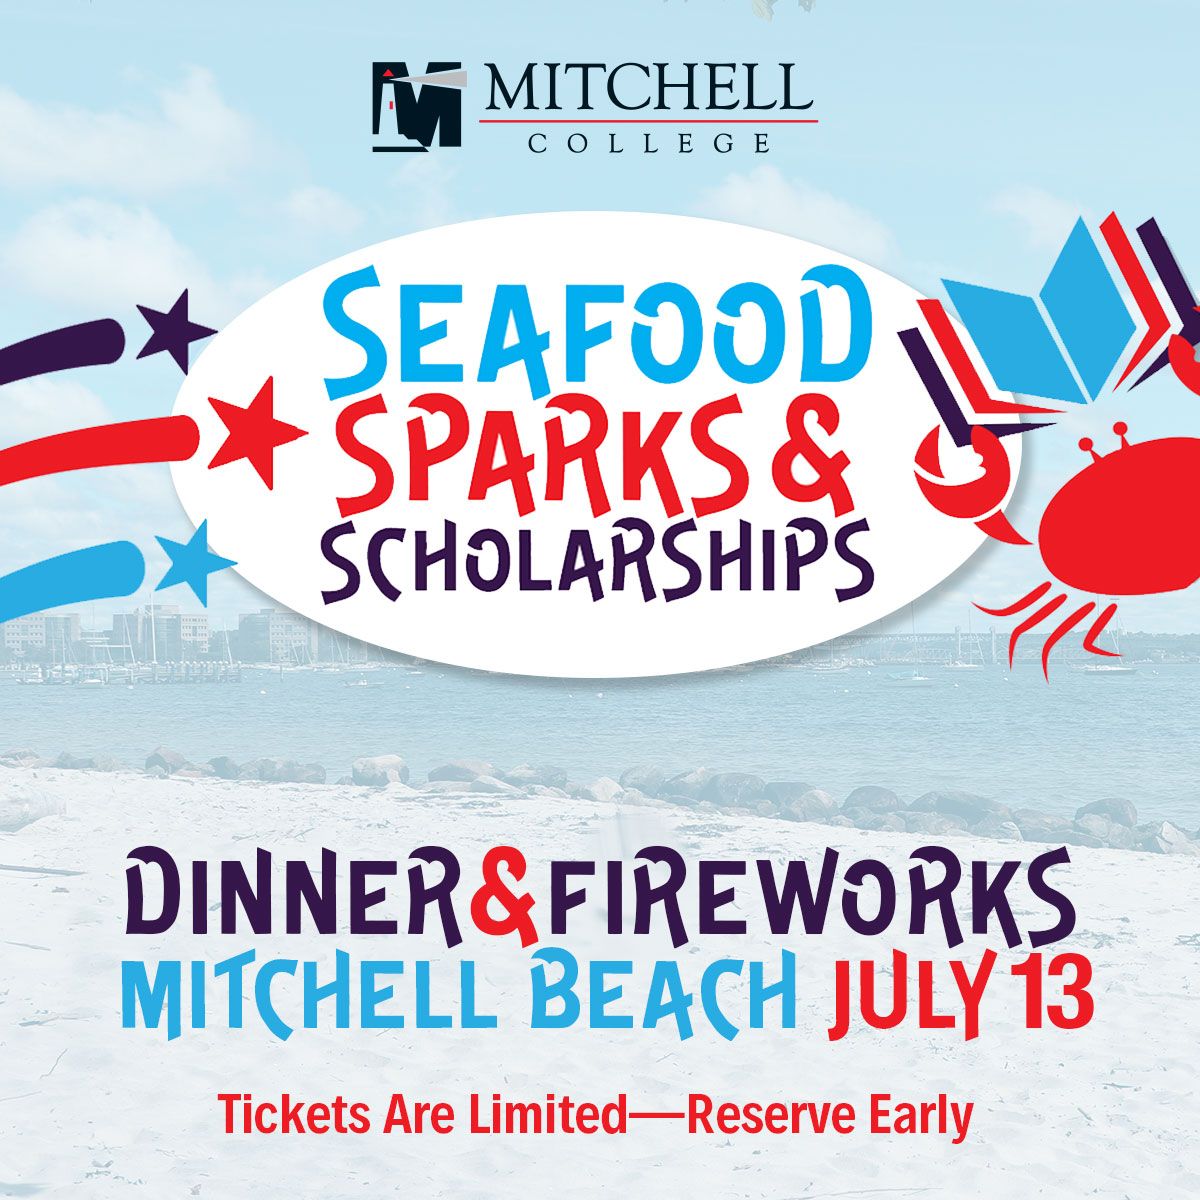 Seafood, Sparks & Scholarships